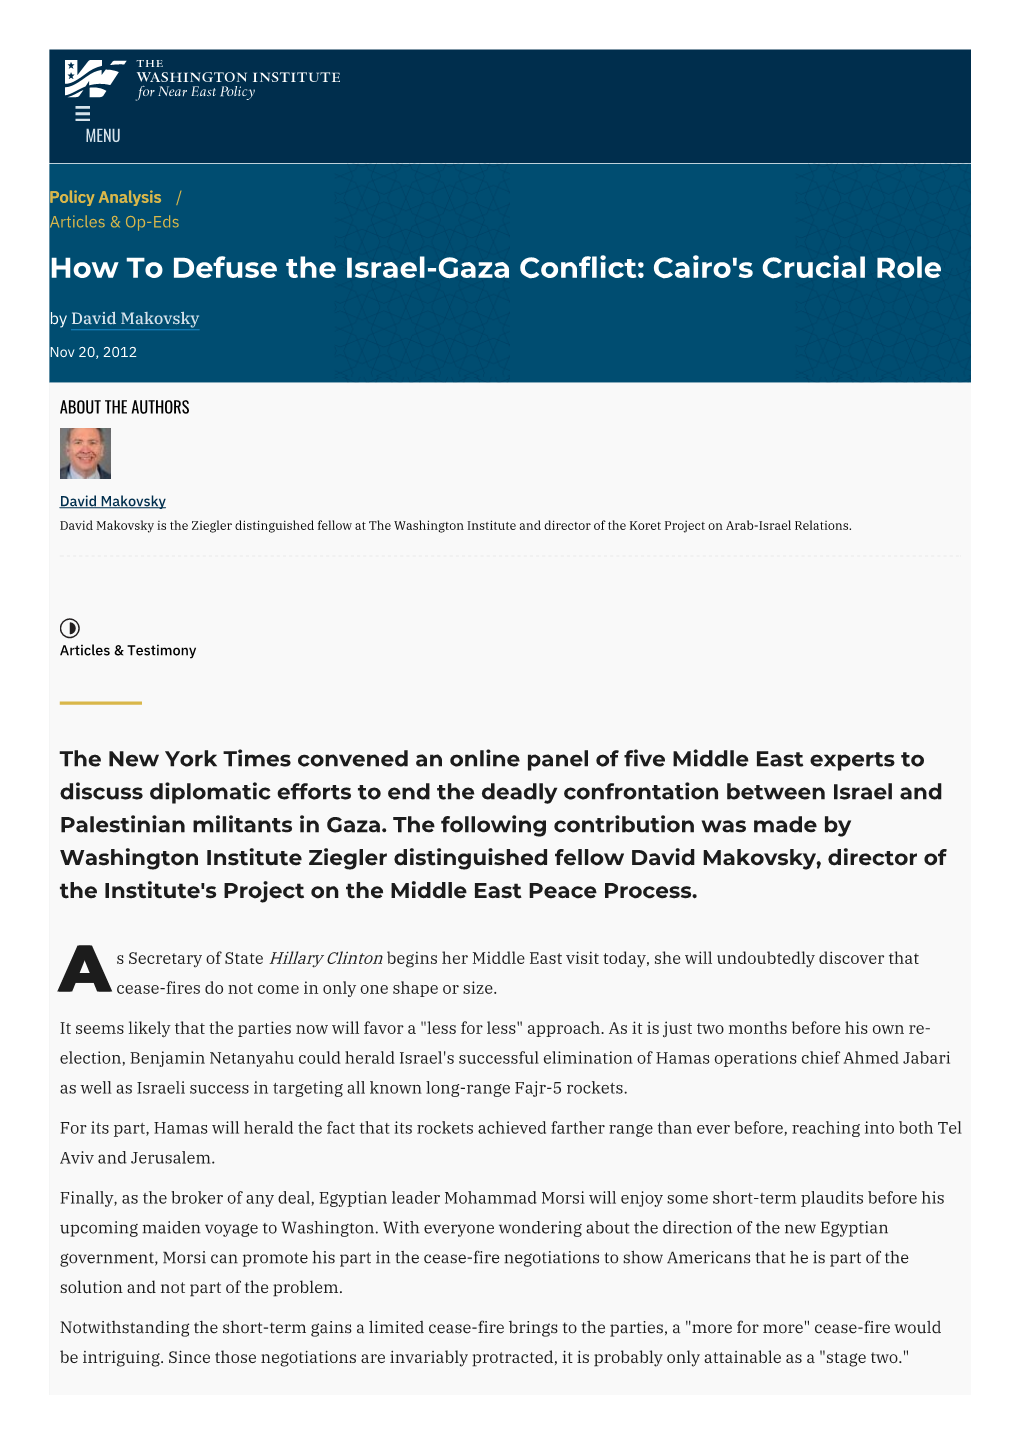 How to Defuse the Israel-Gaza Conflict: Cairo's Crucial Role | the Washington Institute